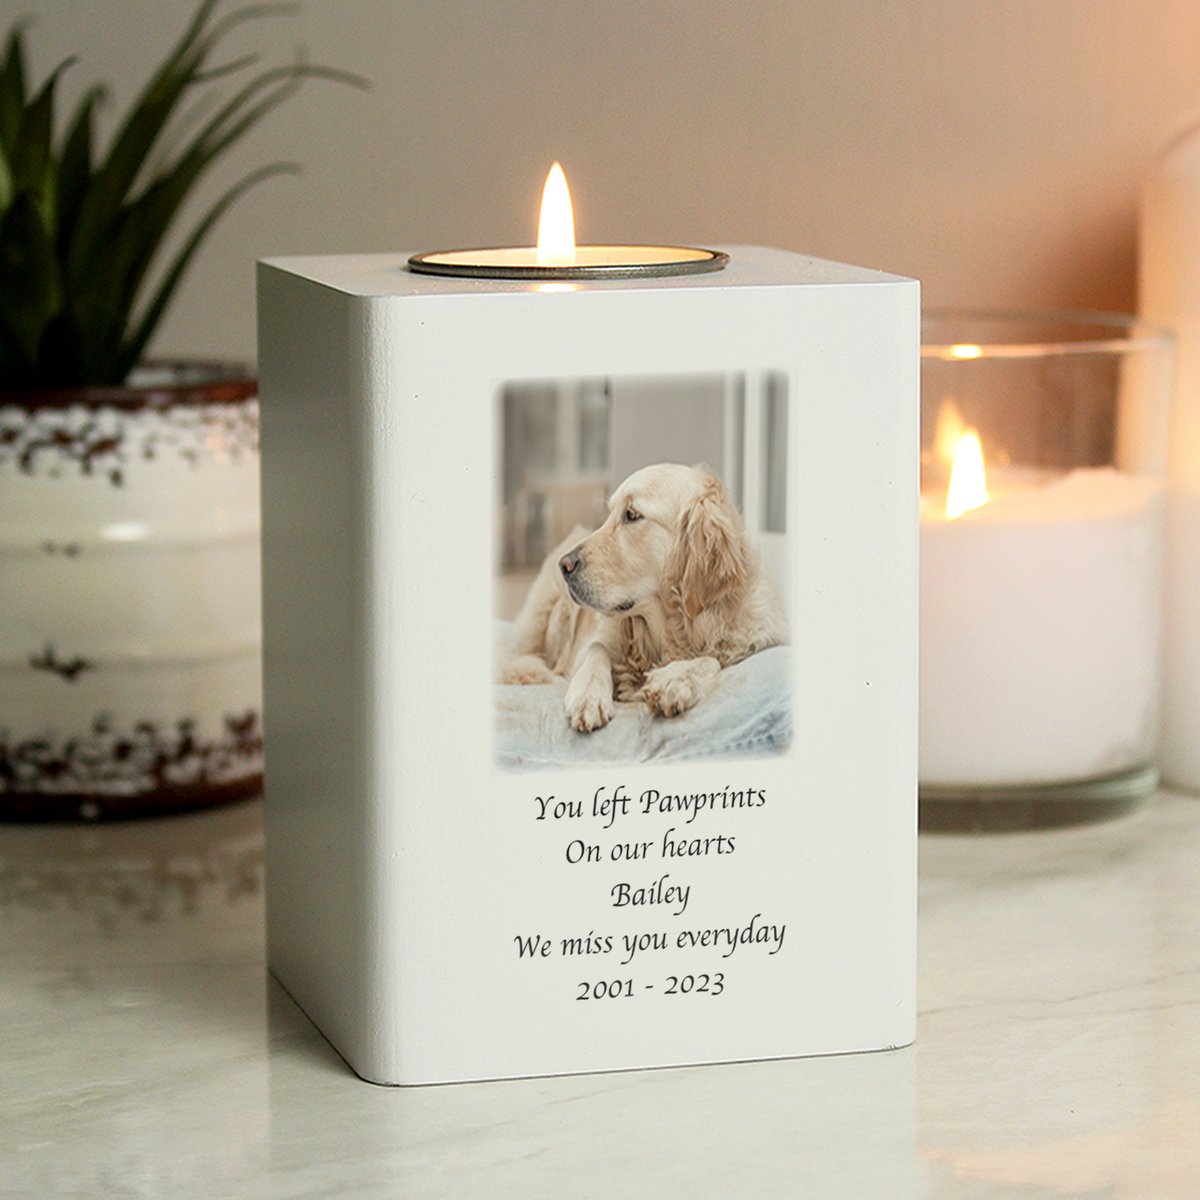 Personalised with your own photograph & words, this wooden tealight holder is now available on the website lilybluestore.com/products/perso…

#candleholder #shopindie #memorial #photogifts #shopsmall  #mhhsbd